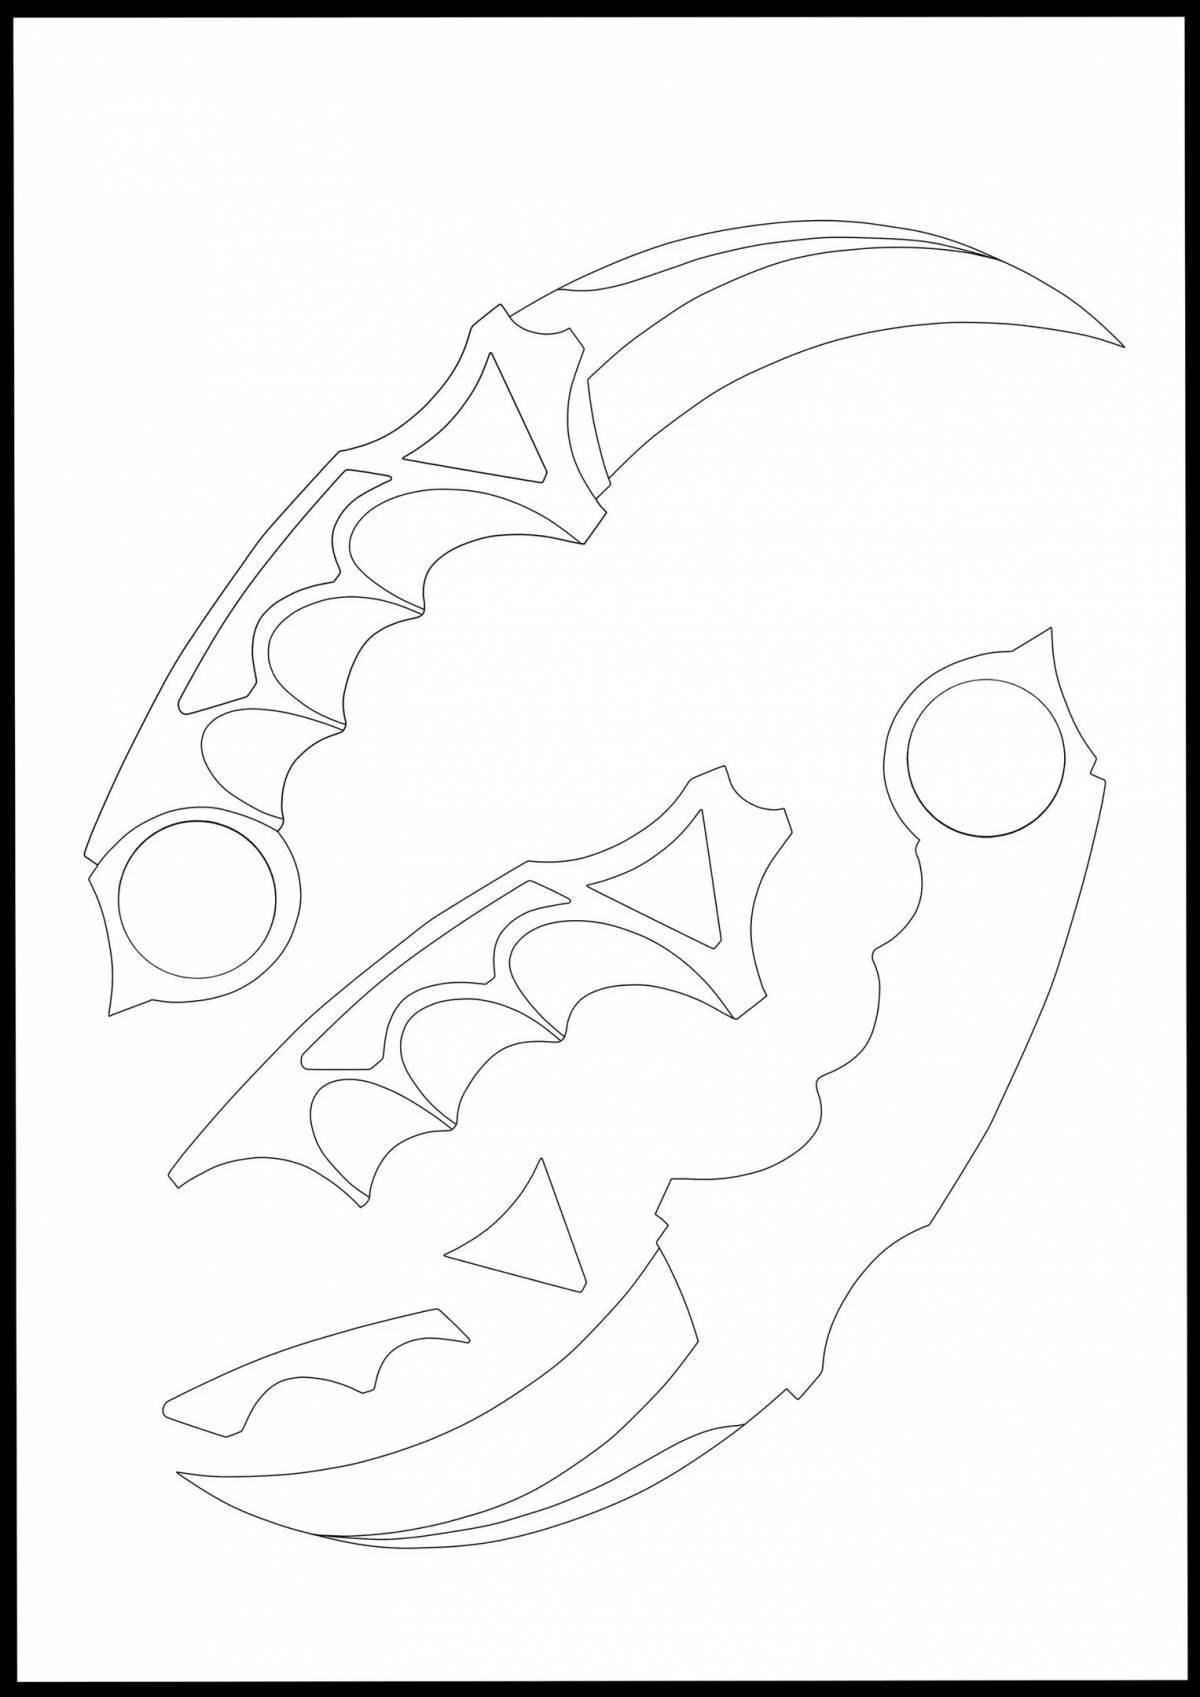 Brightly colored karambit knife coloring page from standoff 2 game